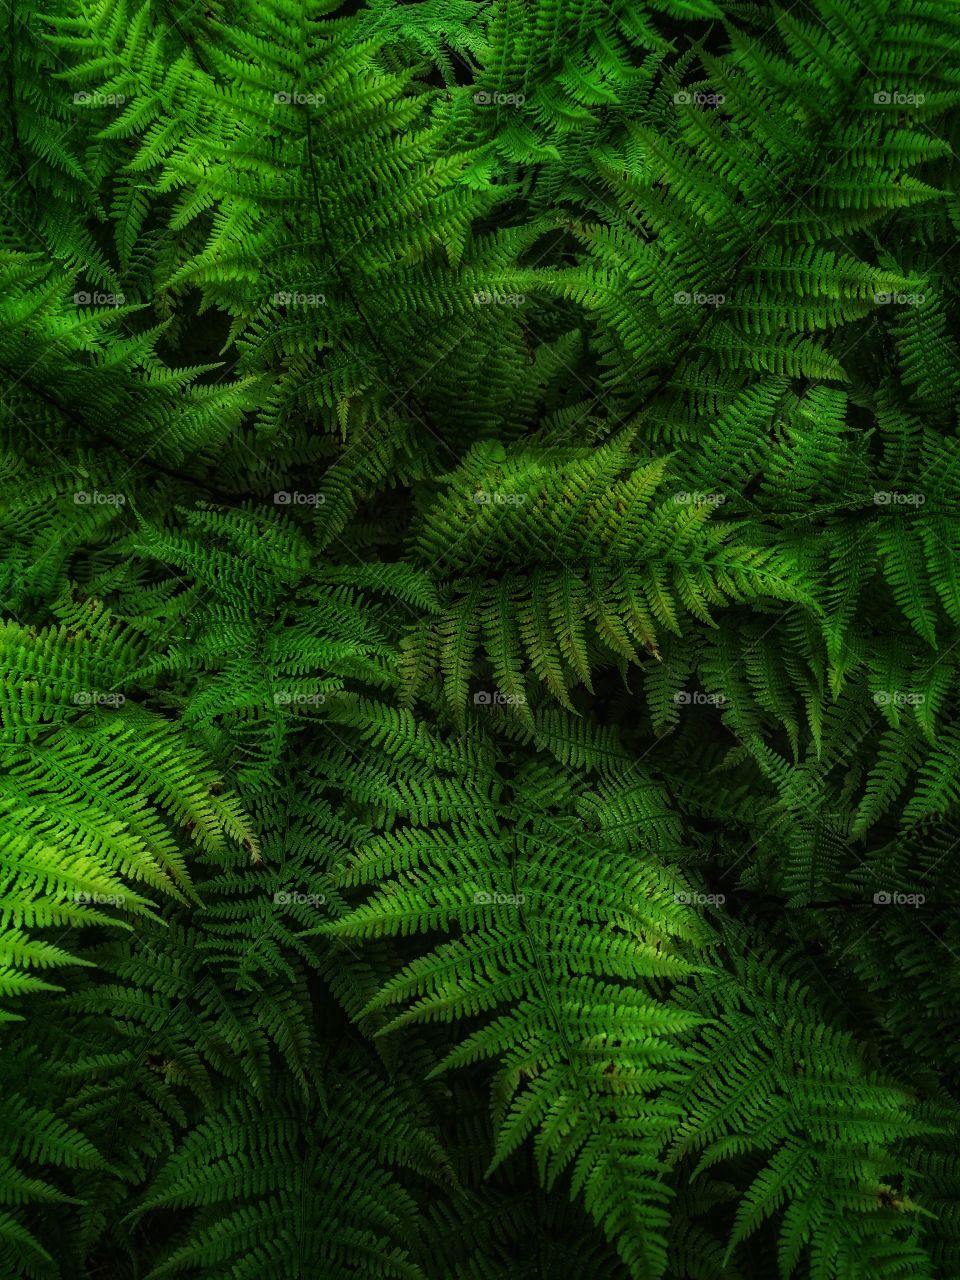 Gorgeous green ferns in the wild. Image edited.